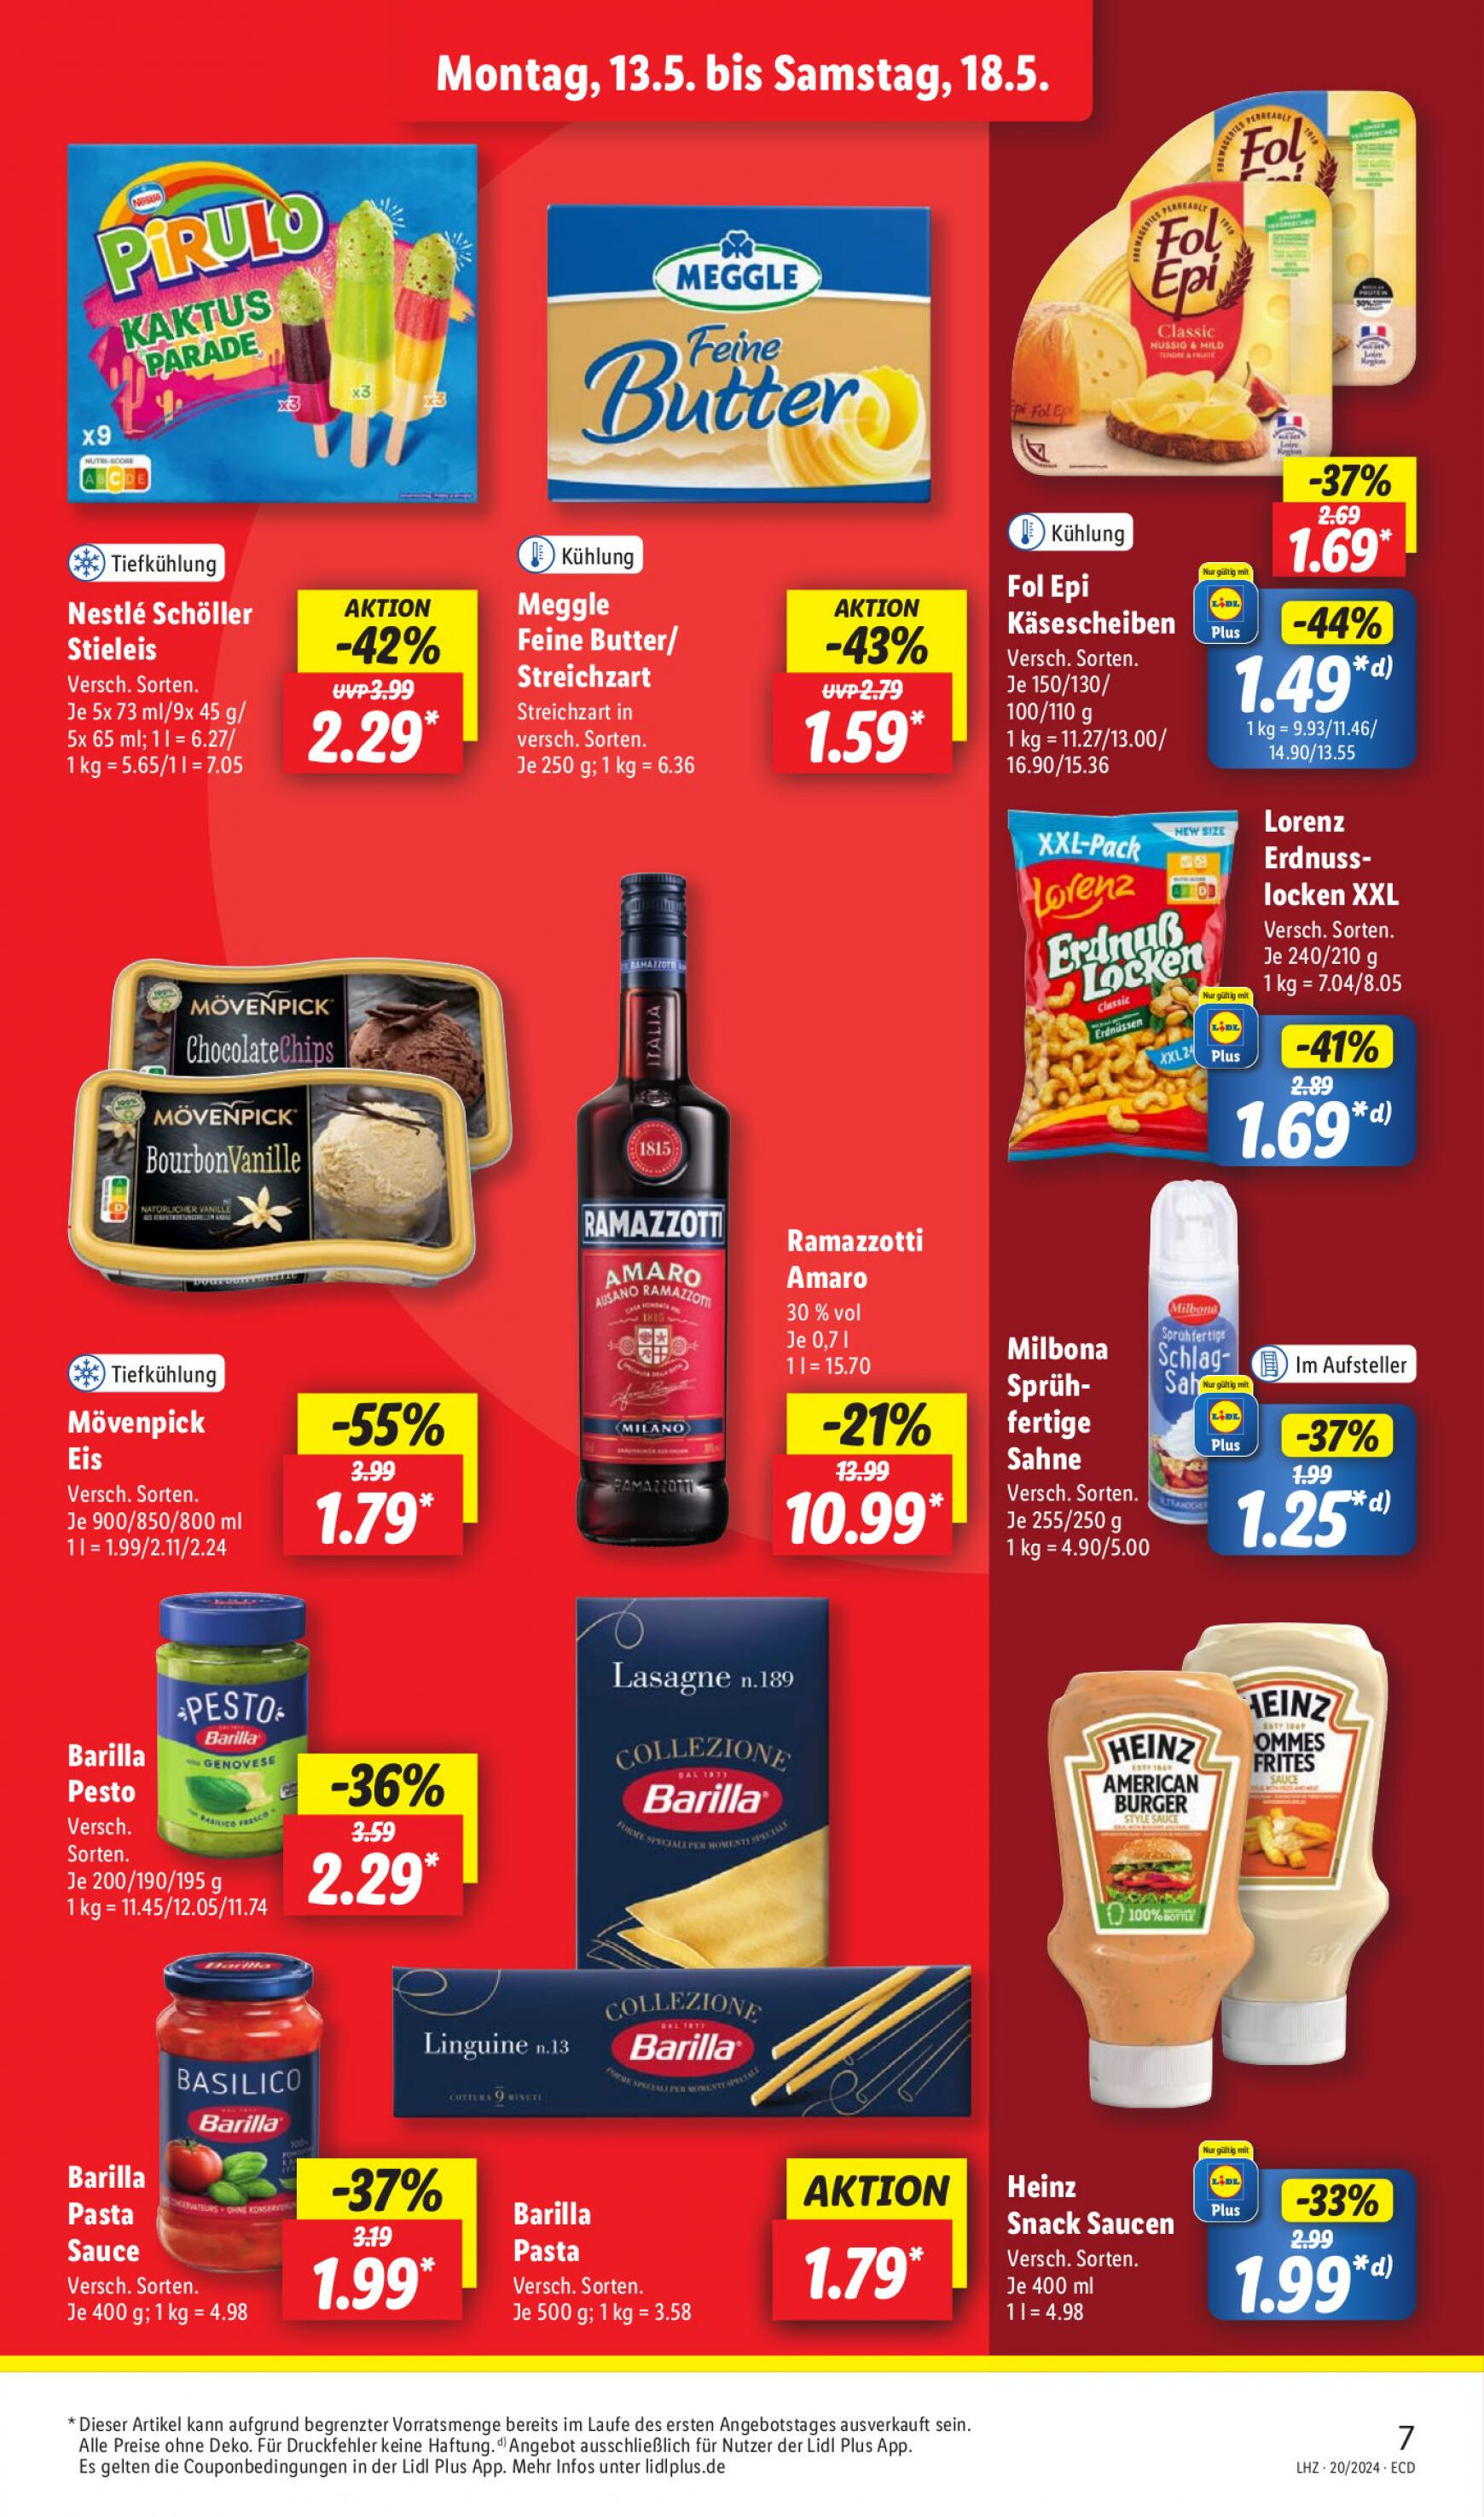 lidl - Flyer Lidl aktuell 13.05. - 18.05. - page: 9